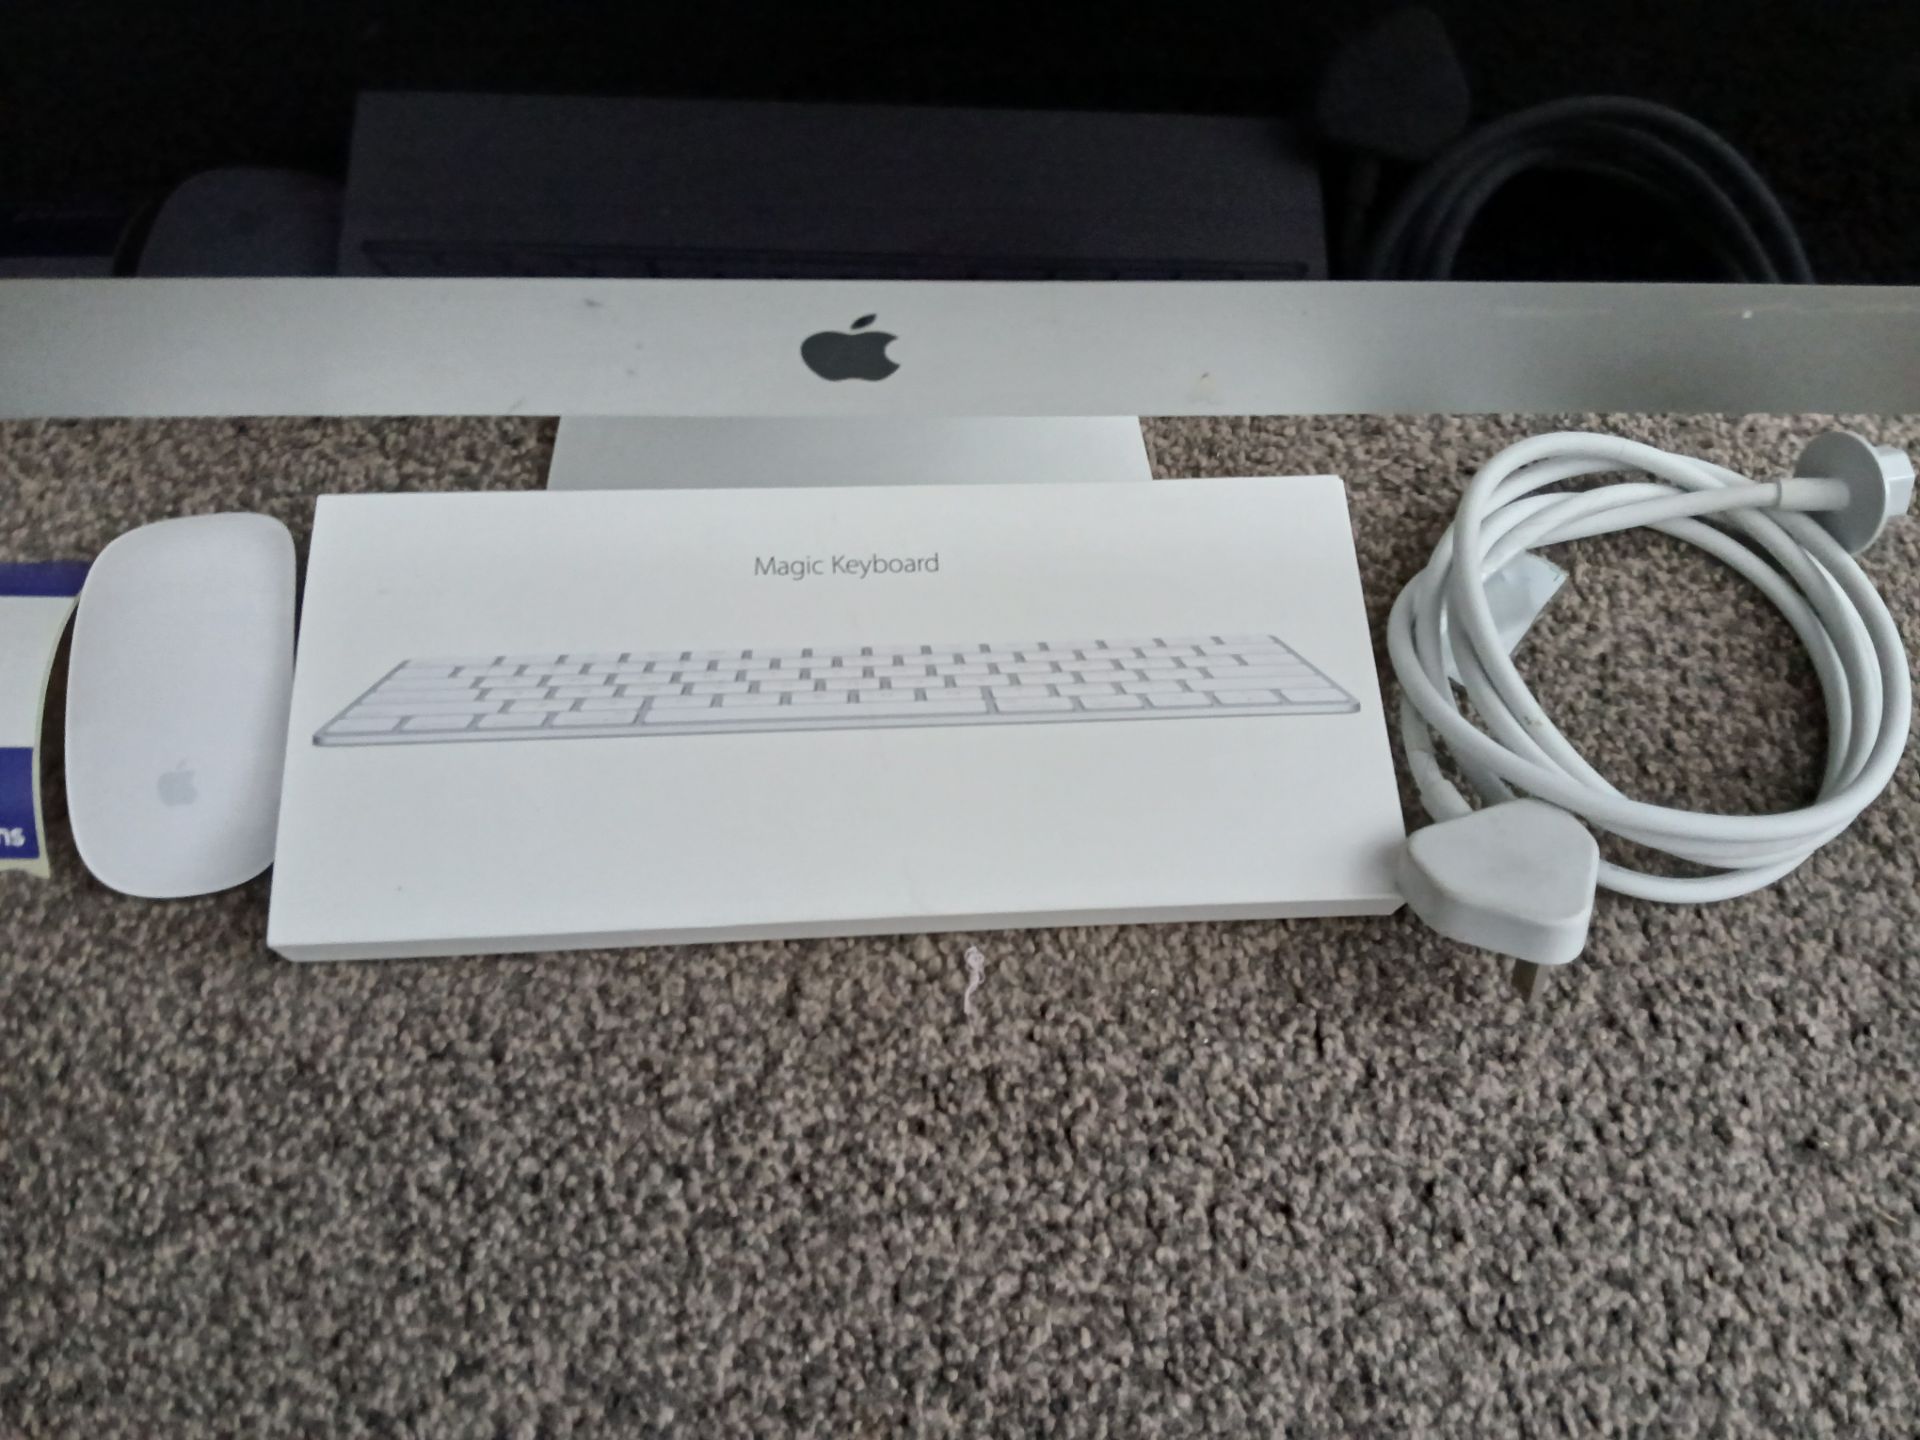 Apple iMac (Retina 5K, 27”, Late 2015) with Power Cable, Keyboard and Mouse, Serial Number - Image 2 of 3